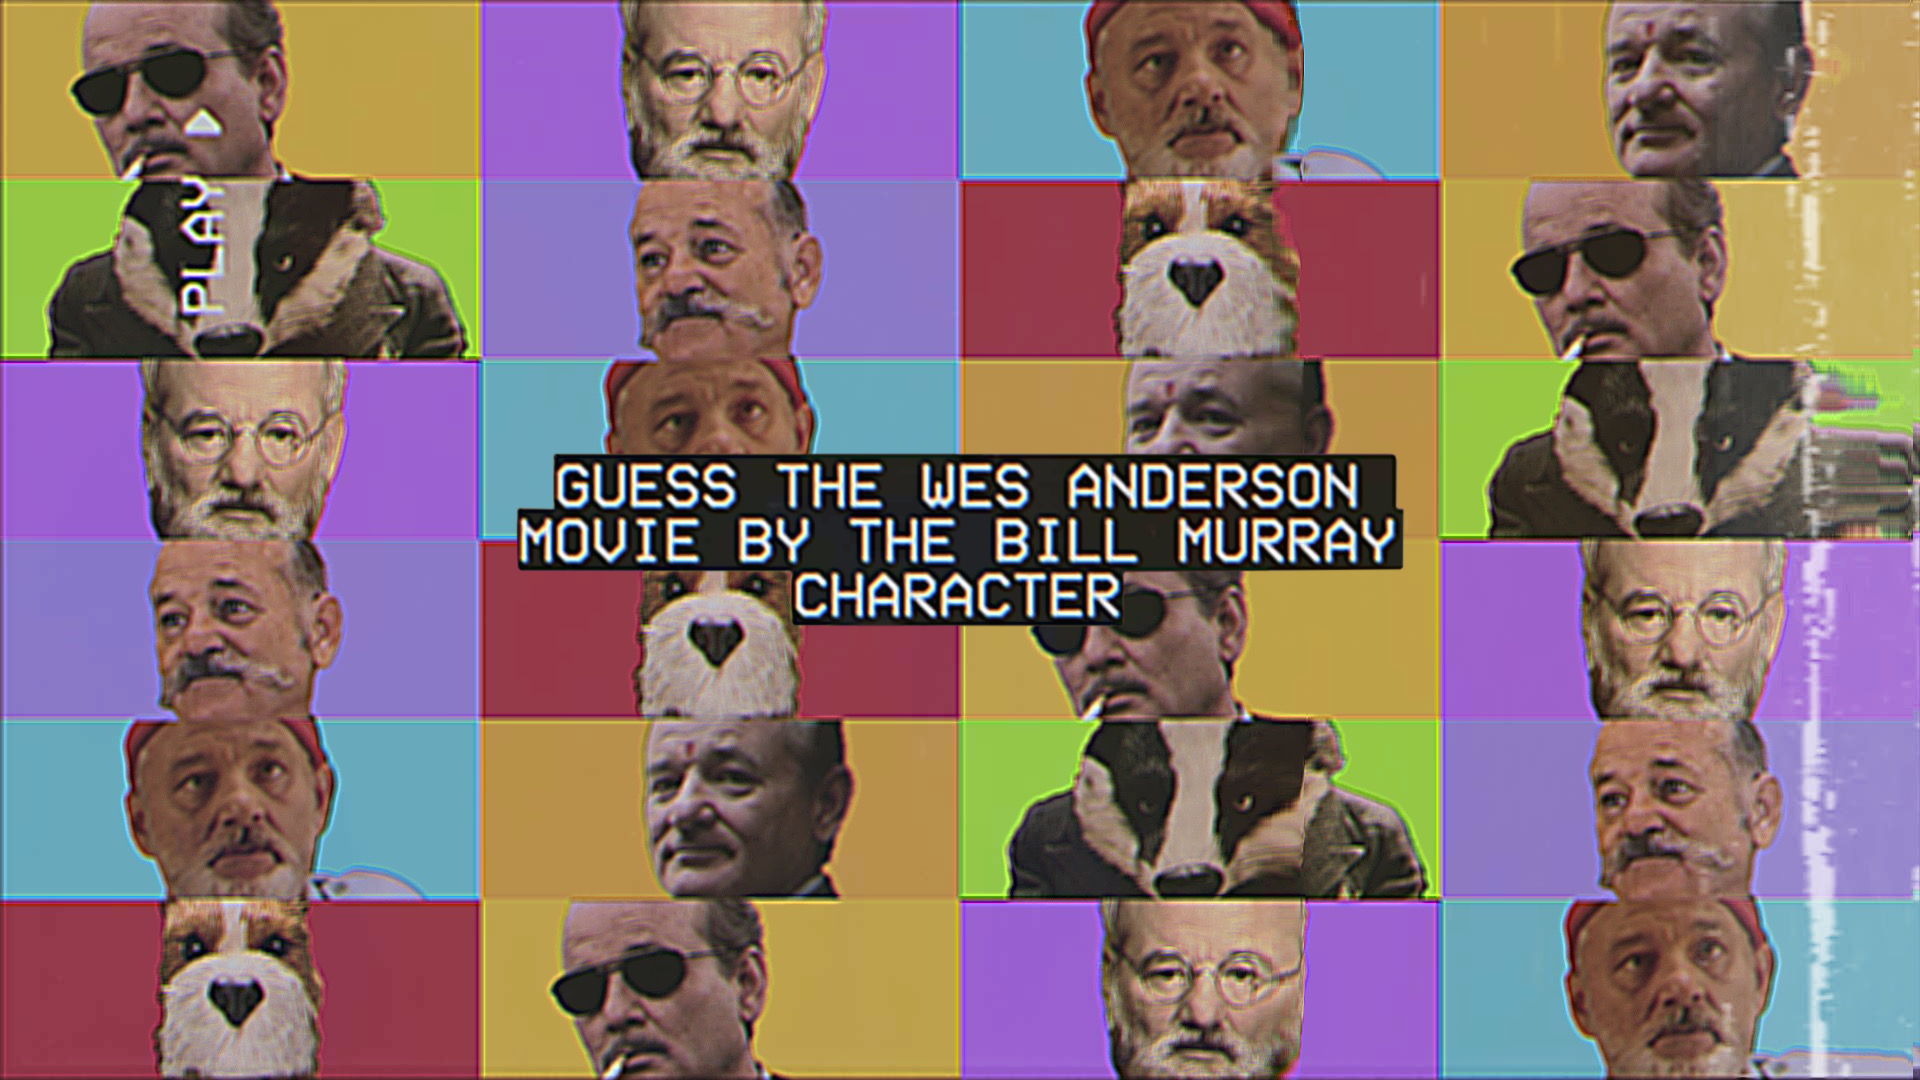 QUIZ: Guess The Wes Anderson Movie By The Bill Murray Character